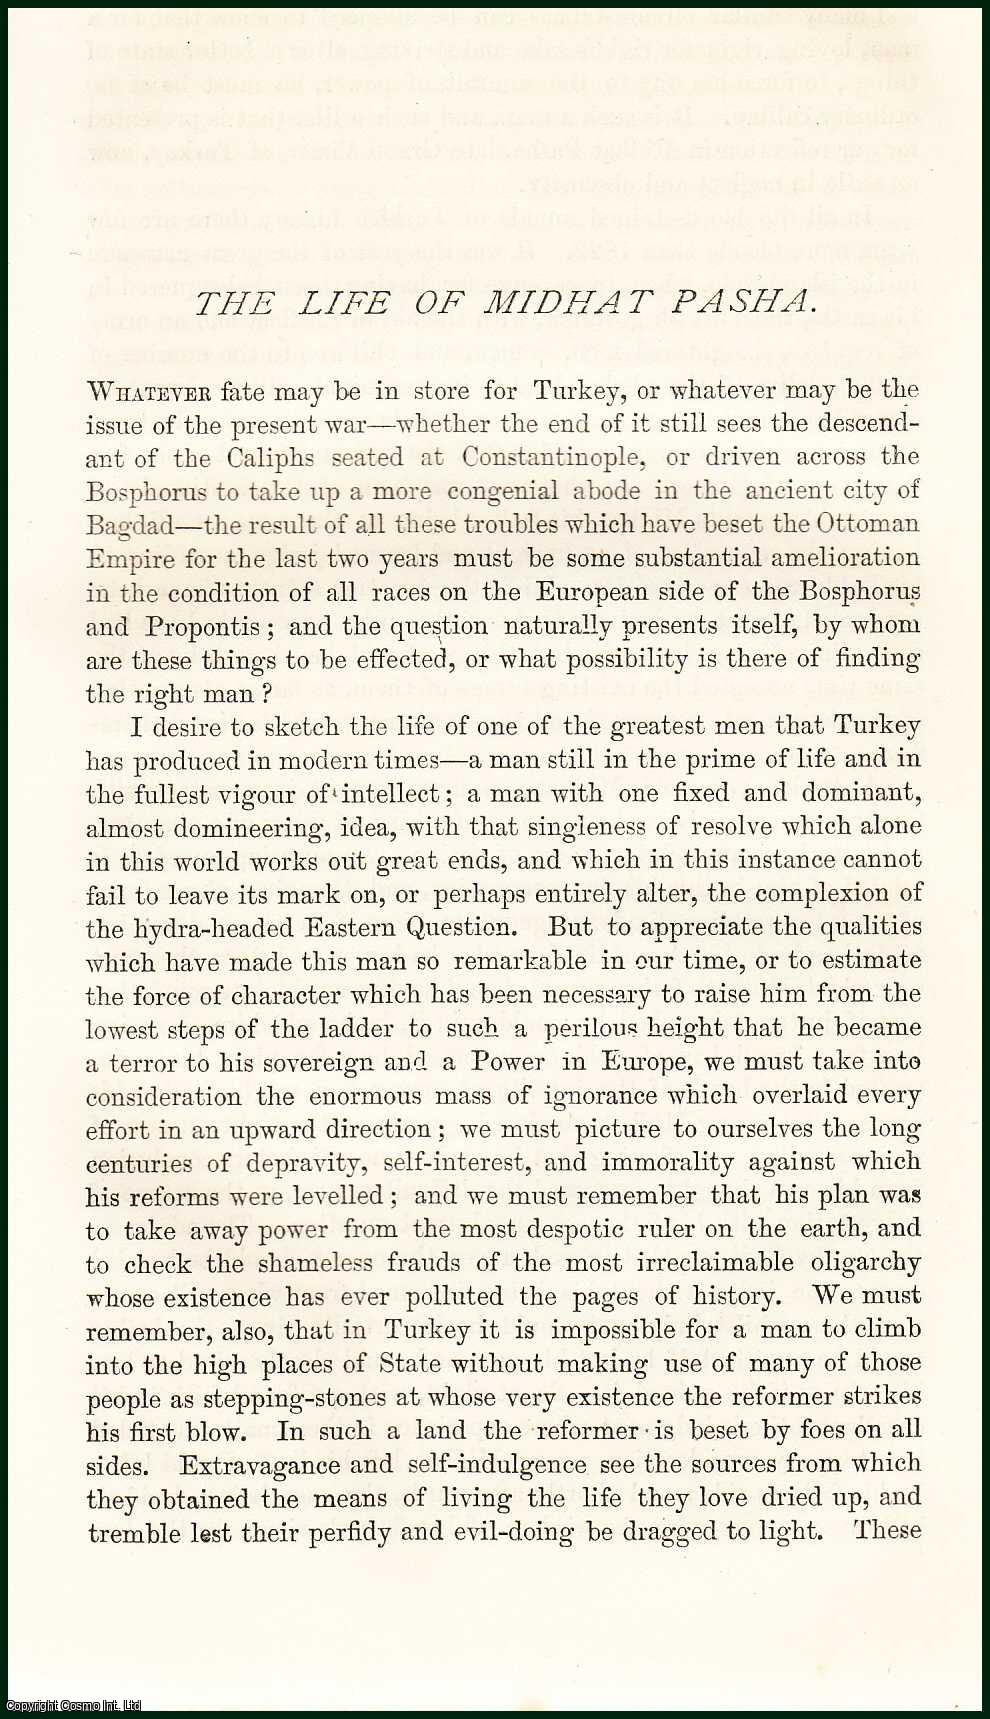 J.W. Gambier - The Life of Midhat Pasha : Ahmed Sefik Midhat Pasha was an Ottoman democrat, kingmaker & one of the leading statesmen during the late Tanzimat period. An uncommon original article from the Nineteenth Century Magazine, 1878.